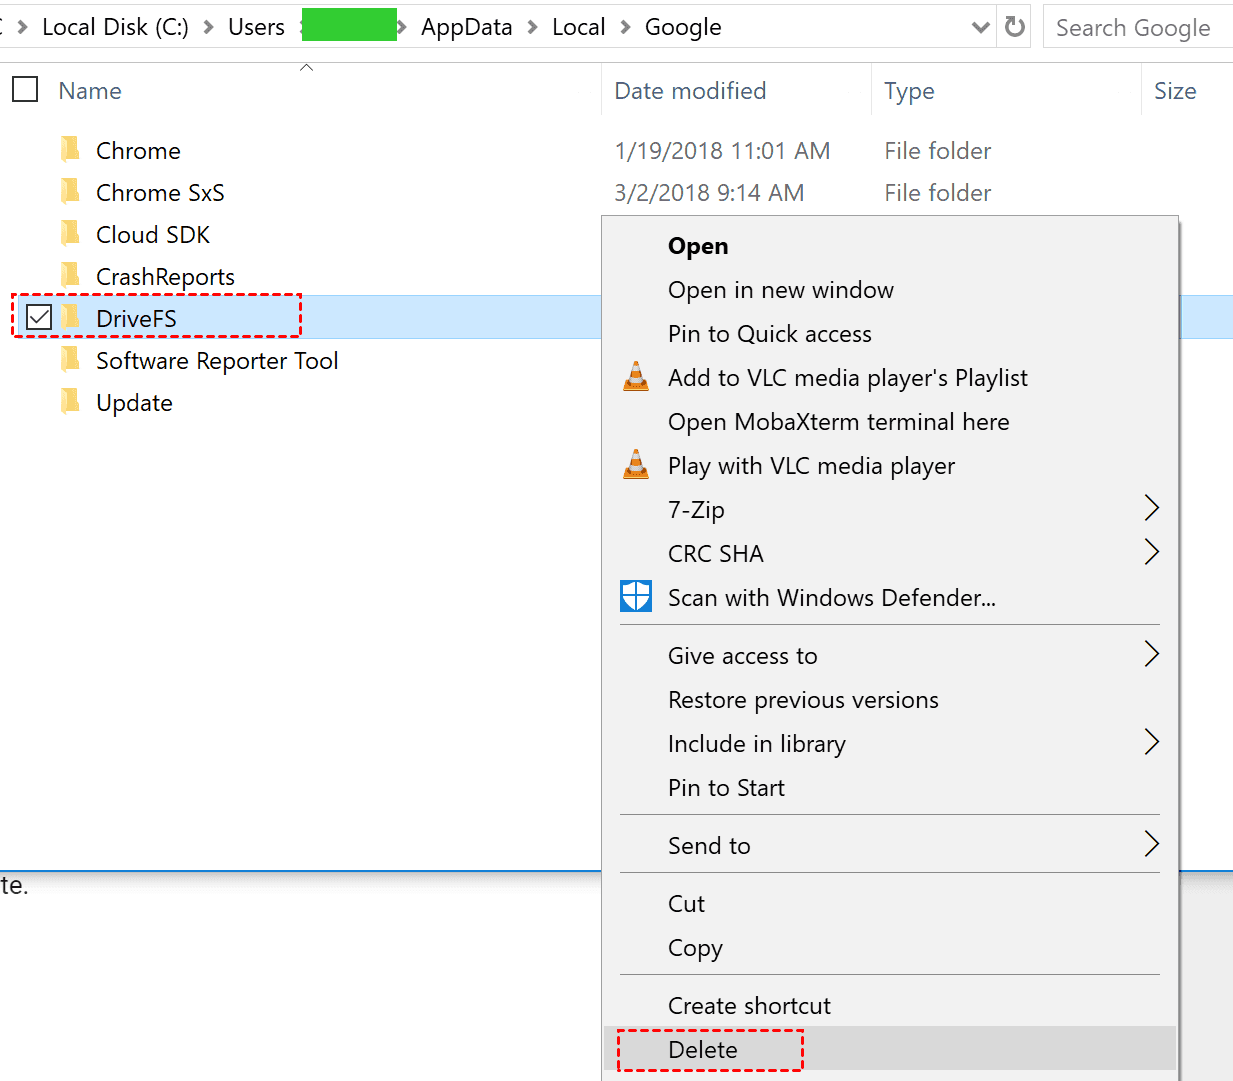 Type "%localappdata%\Google\DriveFS" in the Run dialog box and press Enter.
Select all the files and folders in the opened location and delete them.